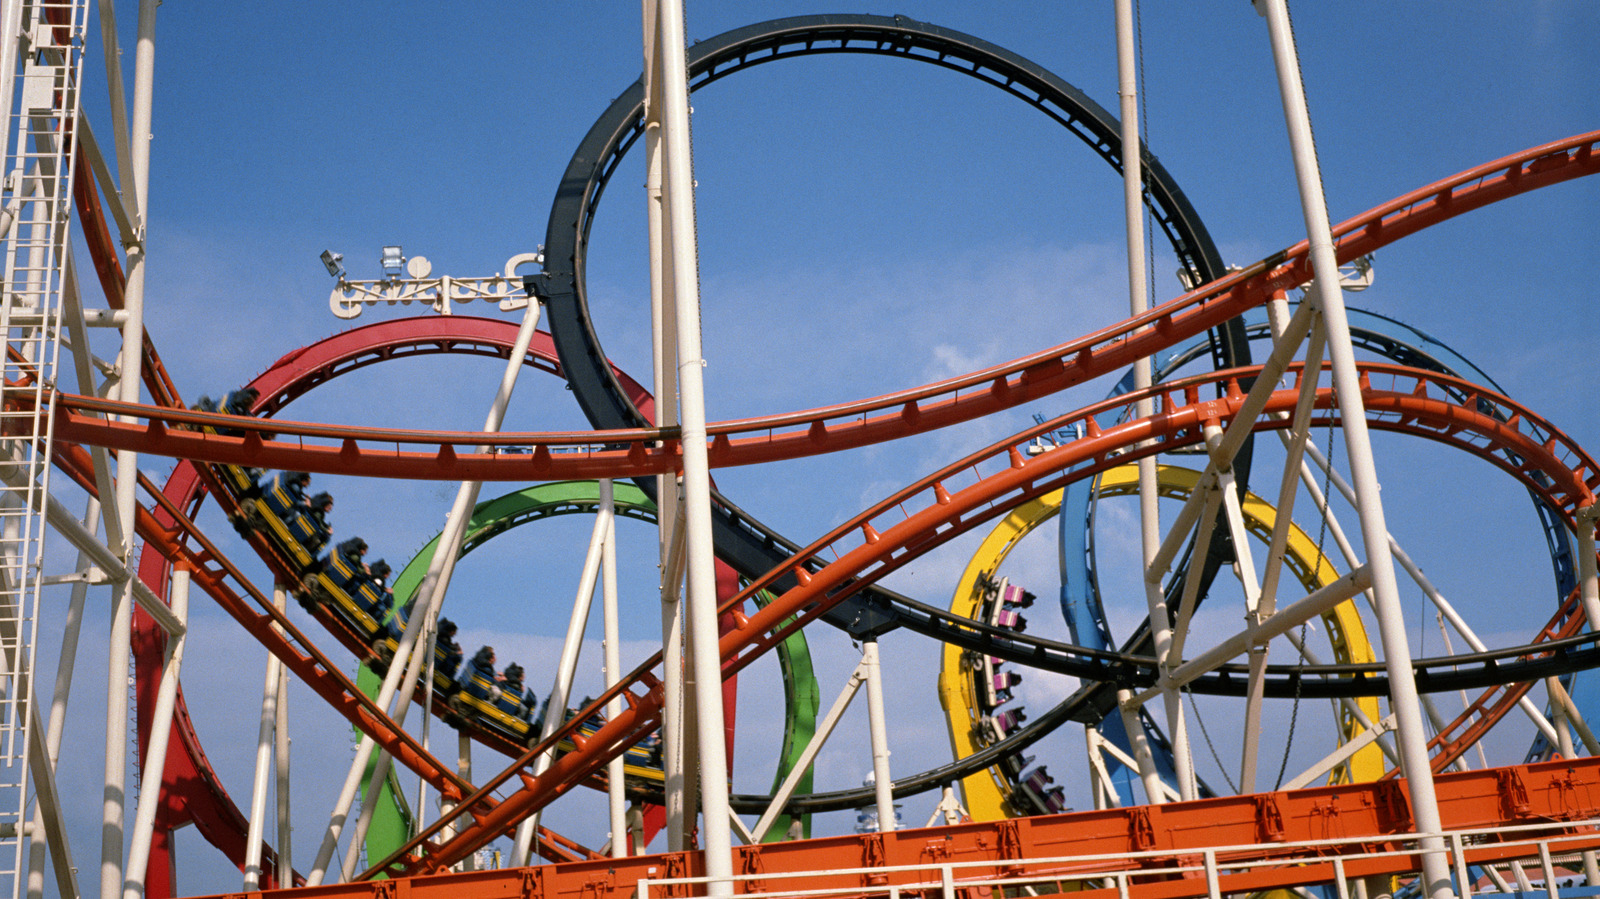 The Best Roller Coasters In The US (And What Ones To Skip)